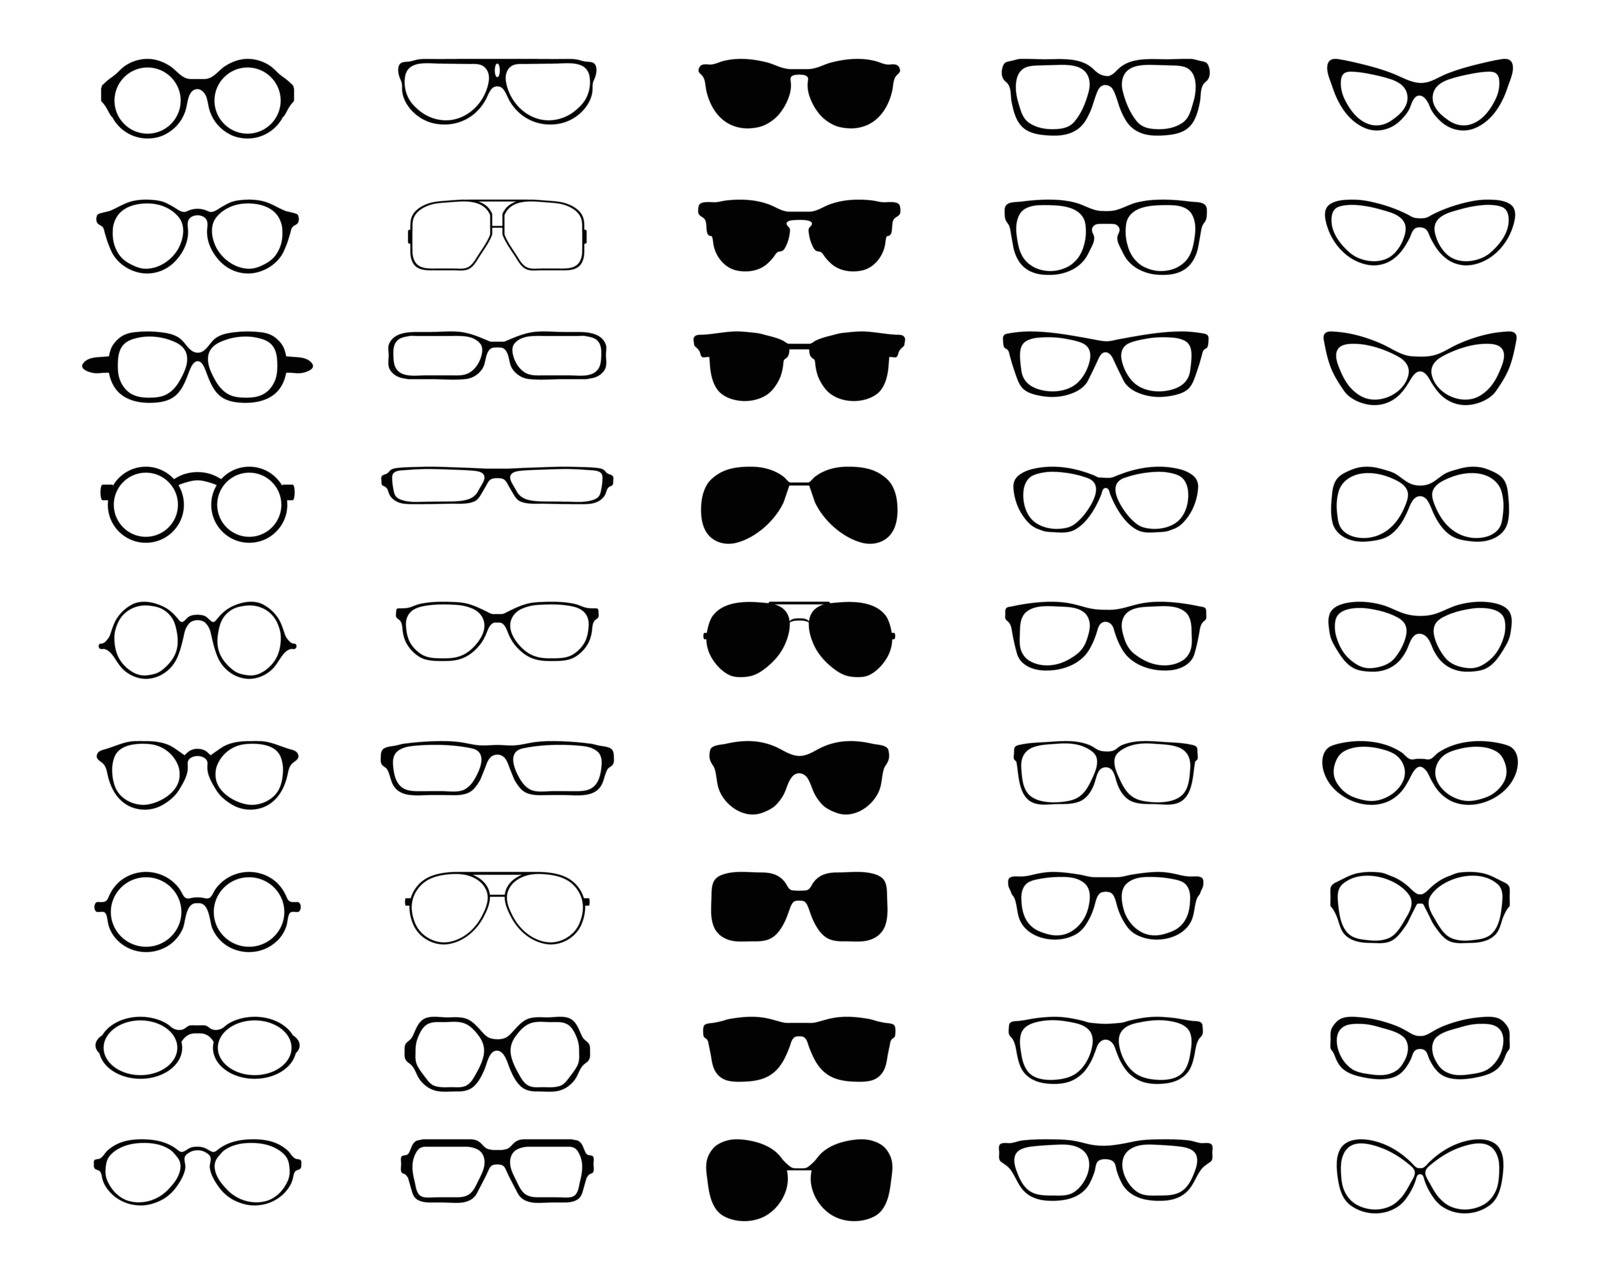 silhouettes of different eyeglasses by ratkomat